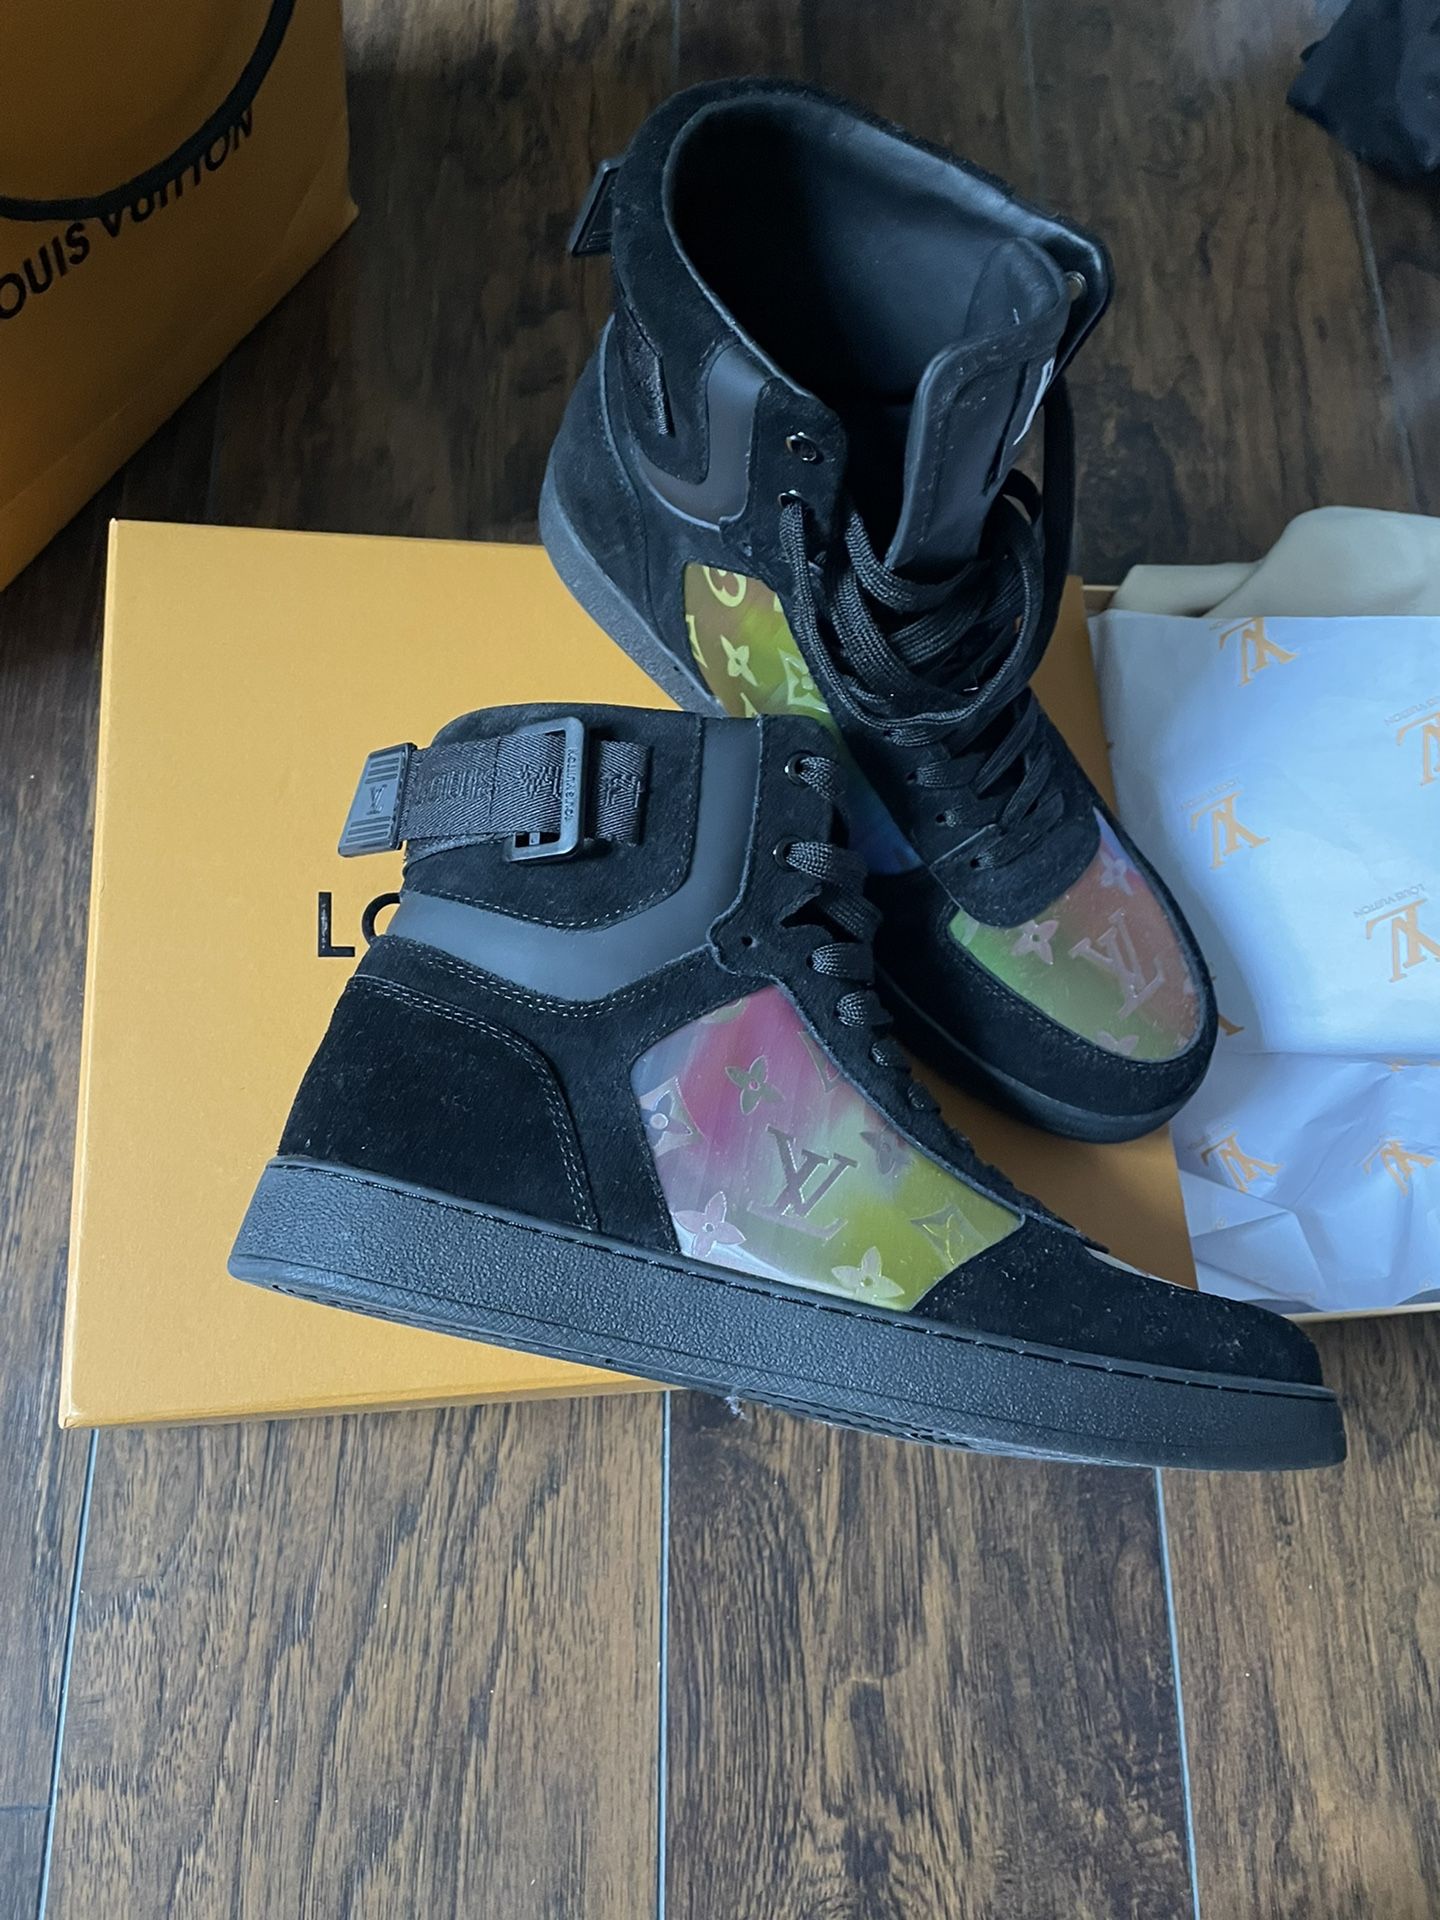 Louis Vuitton Rivoli Black Luxembourg Iridescent 2019 Sneakers - Sneakers,  Shoes